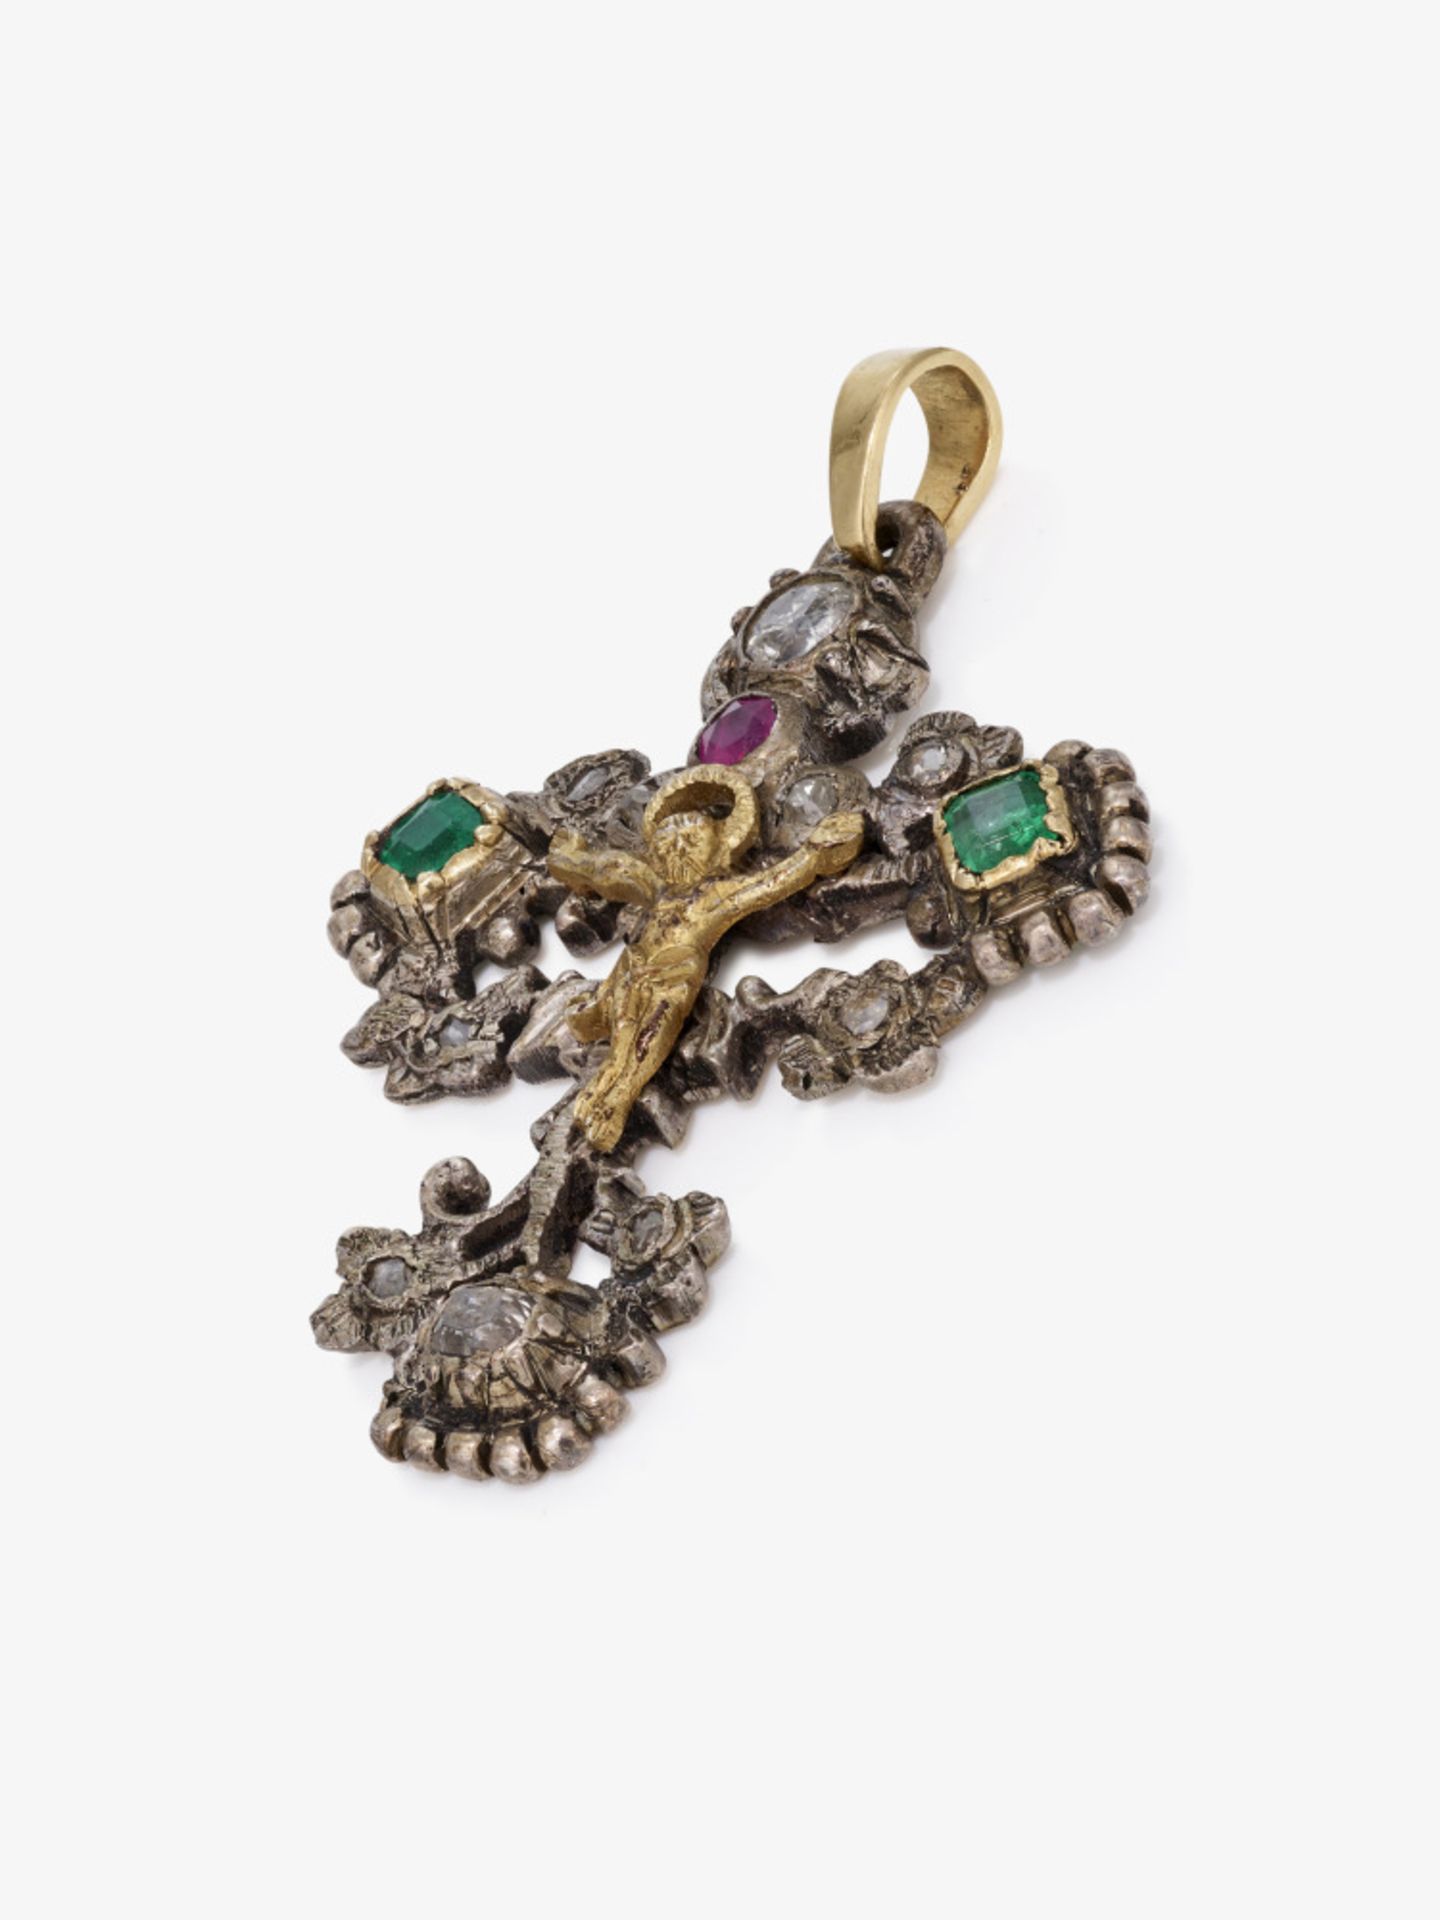 A rare cross pendant with the Body of Christ and flower tendrils - Probably Spain, circa 1740-1750 - Image 2 of 2